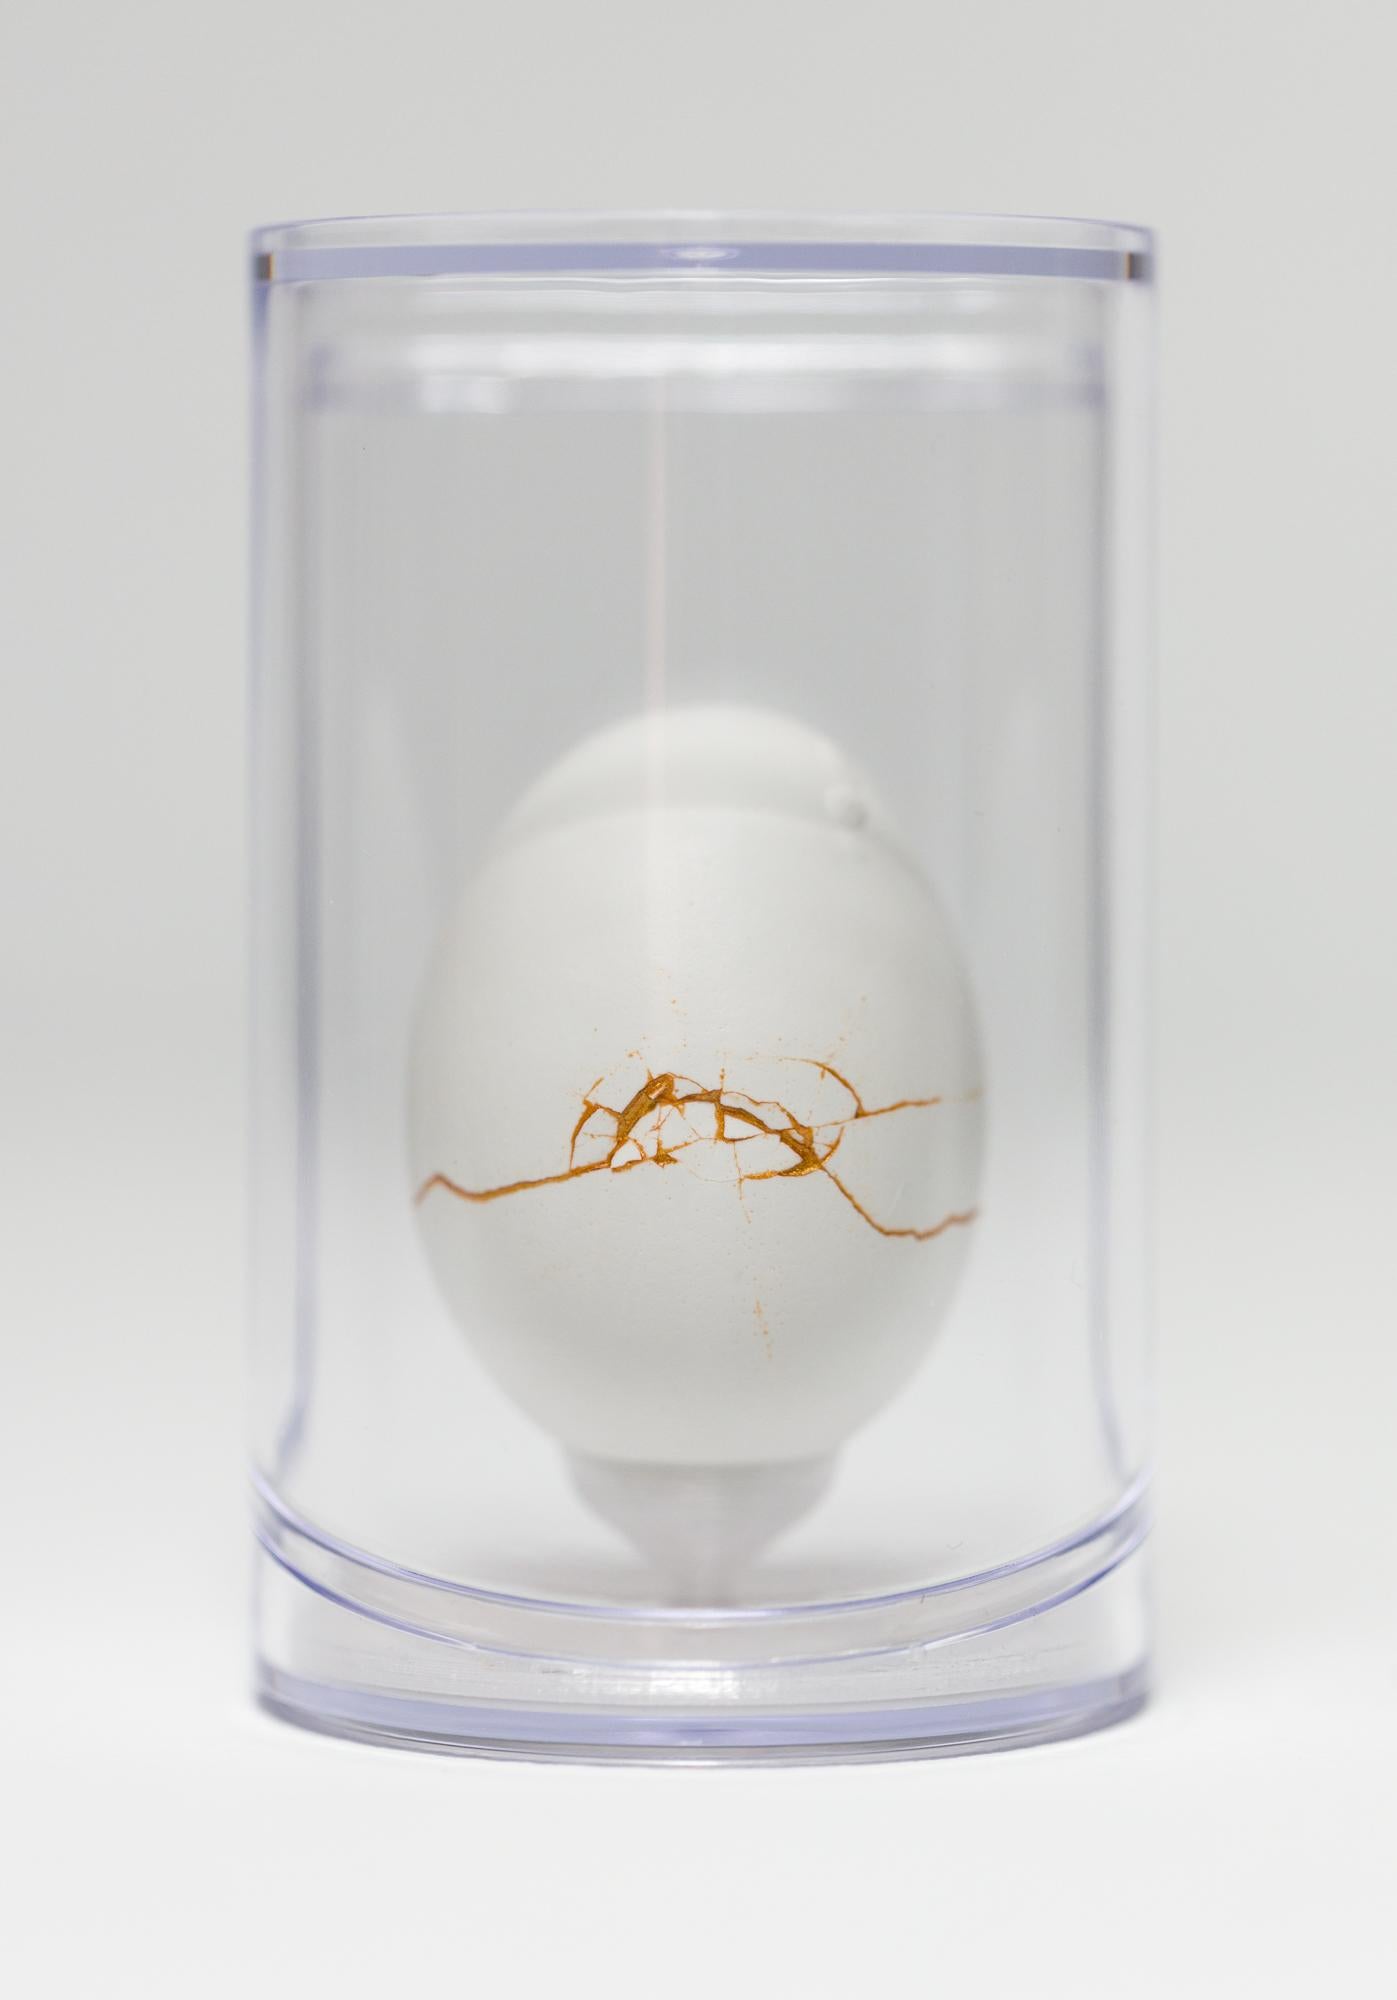 "Day in the Life : Greene & Greene #90", Objects for Objects Founds, Egg Motif